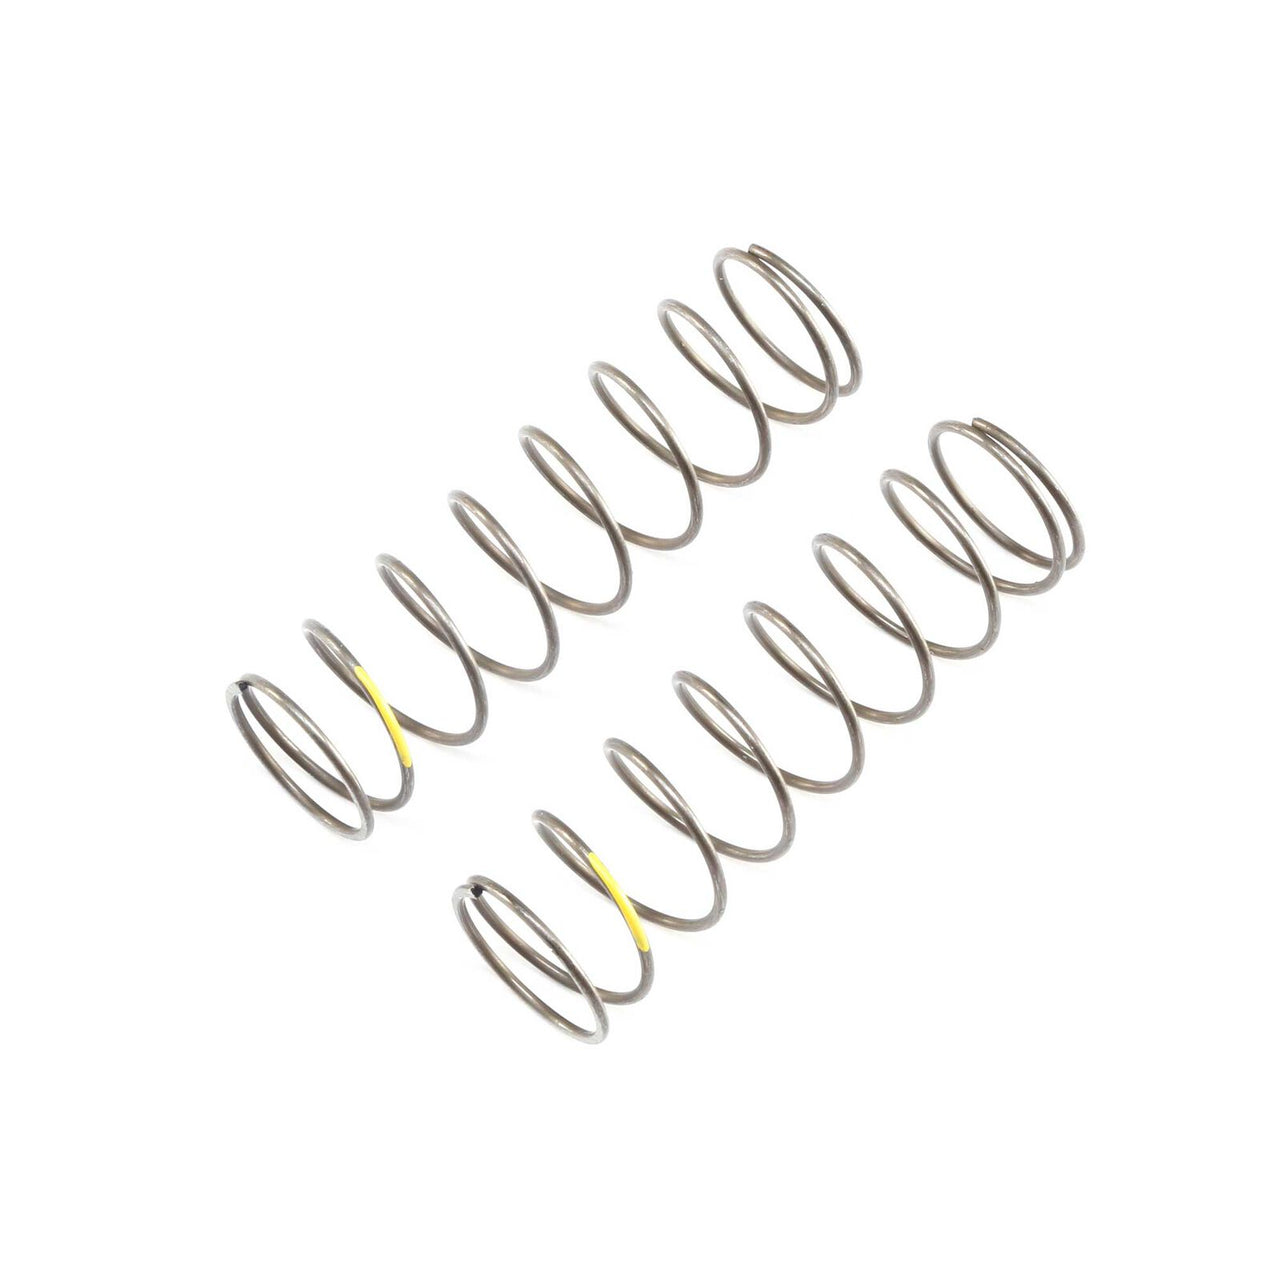 TLR344025 16MM EVO RR SHK SPRING, 4.2 RATE, YELLOW(2):8B 4.0